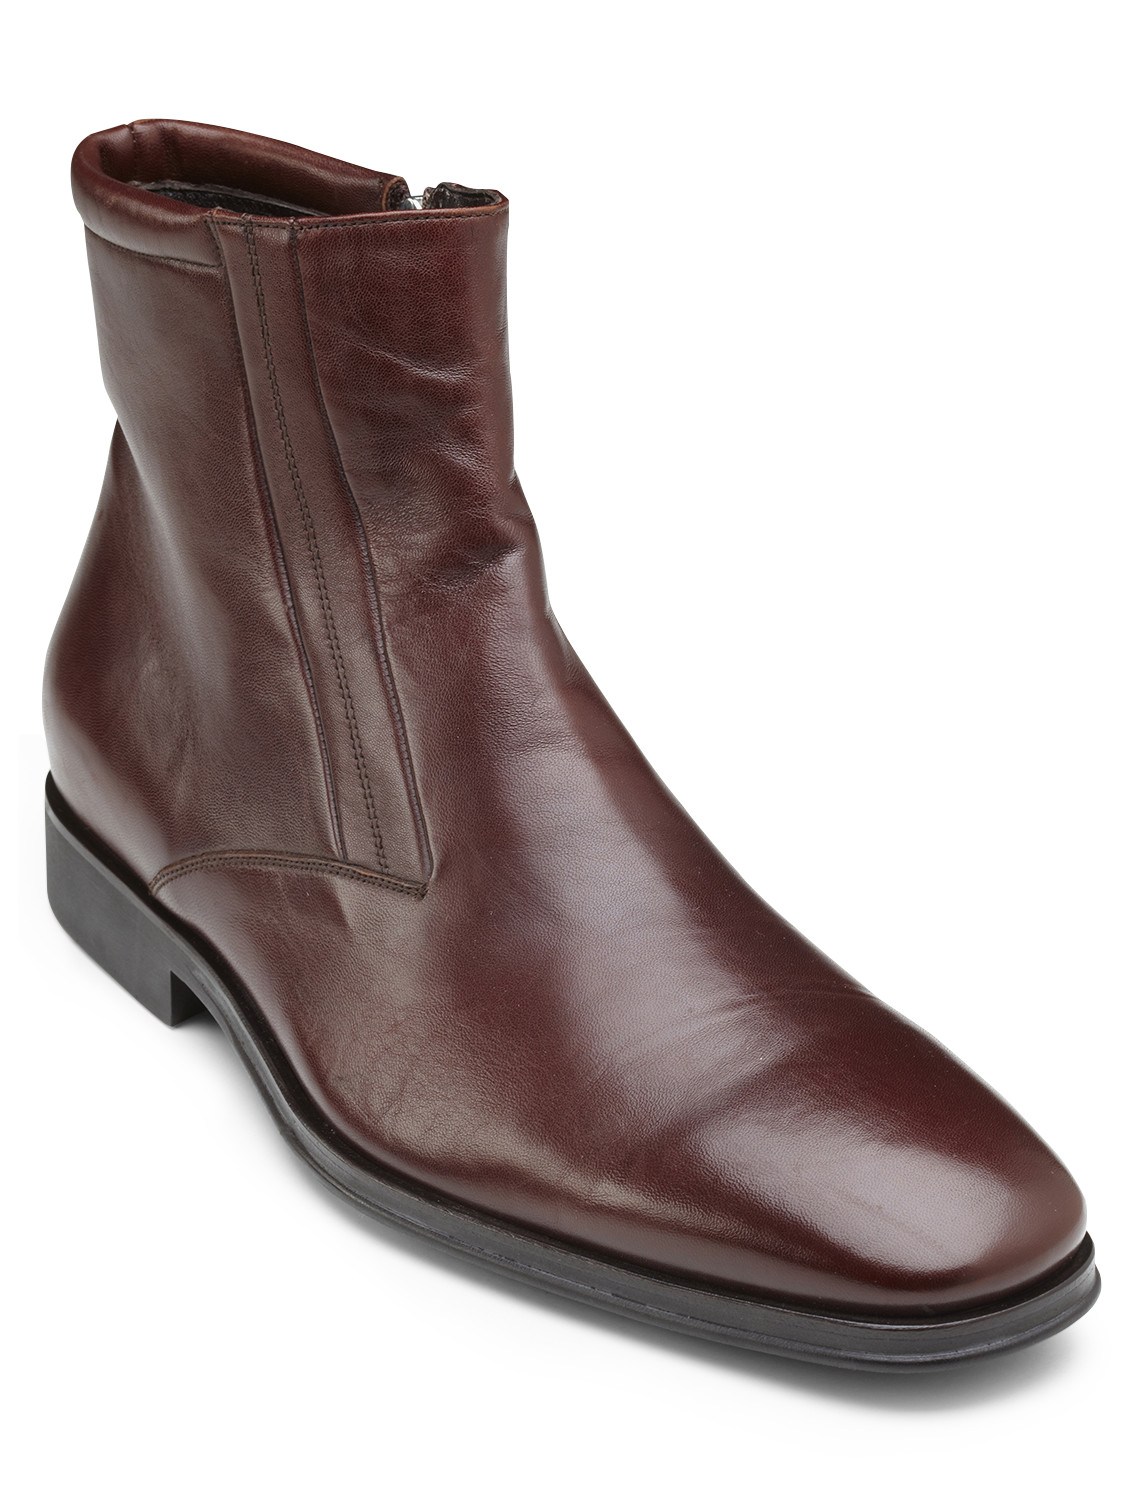 Men's Extra Wide Dress Boots in Big Sizes | DXL